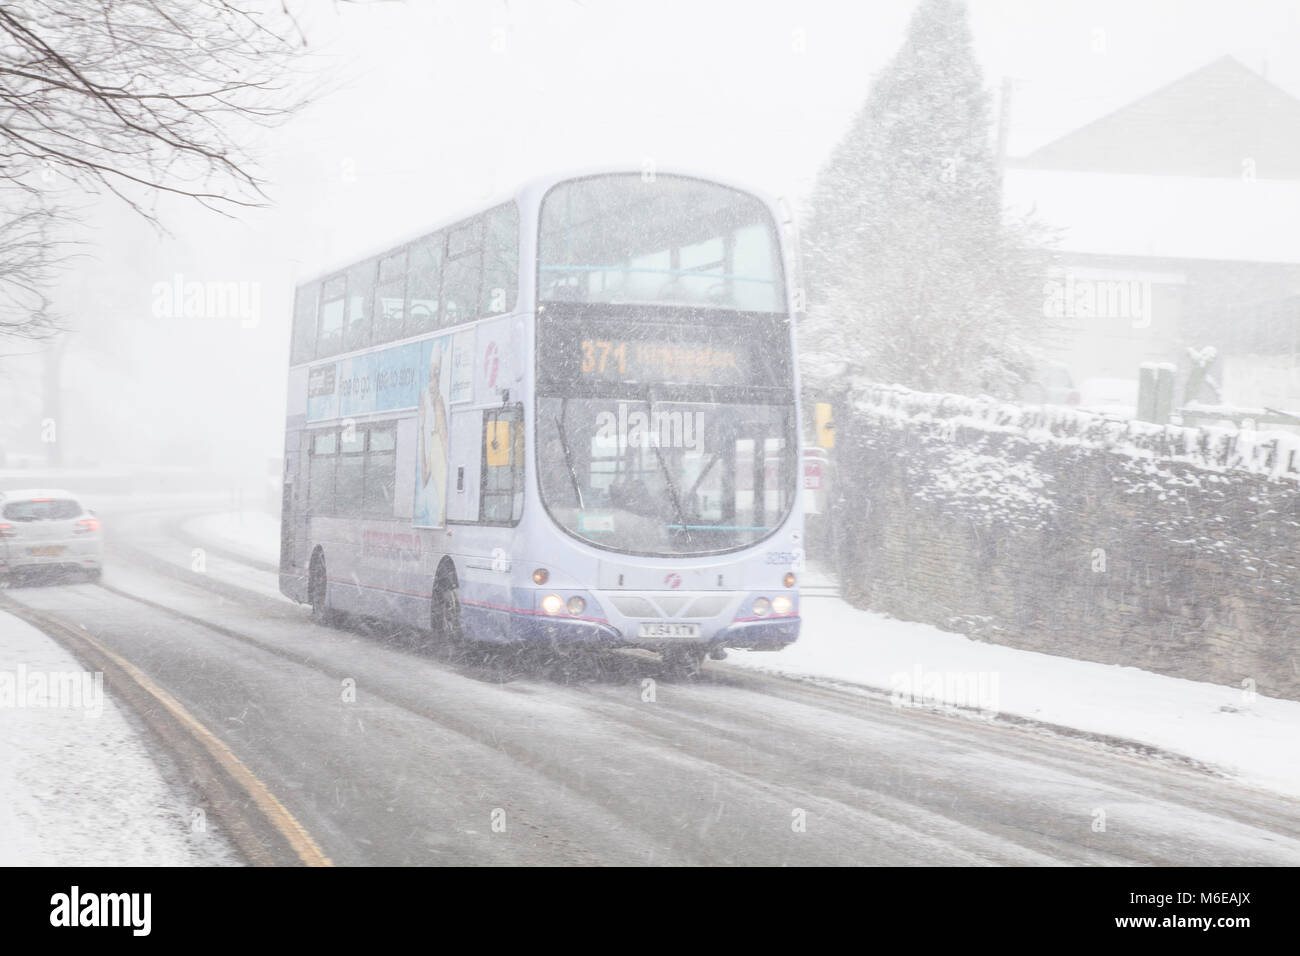 English double decker bus in extreme snow storm Stock Photo